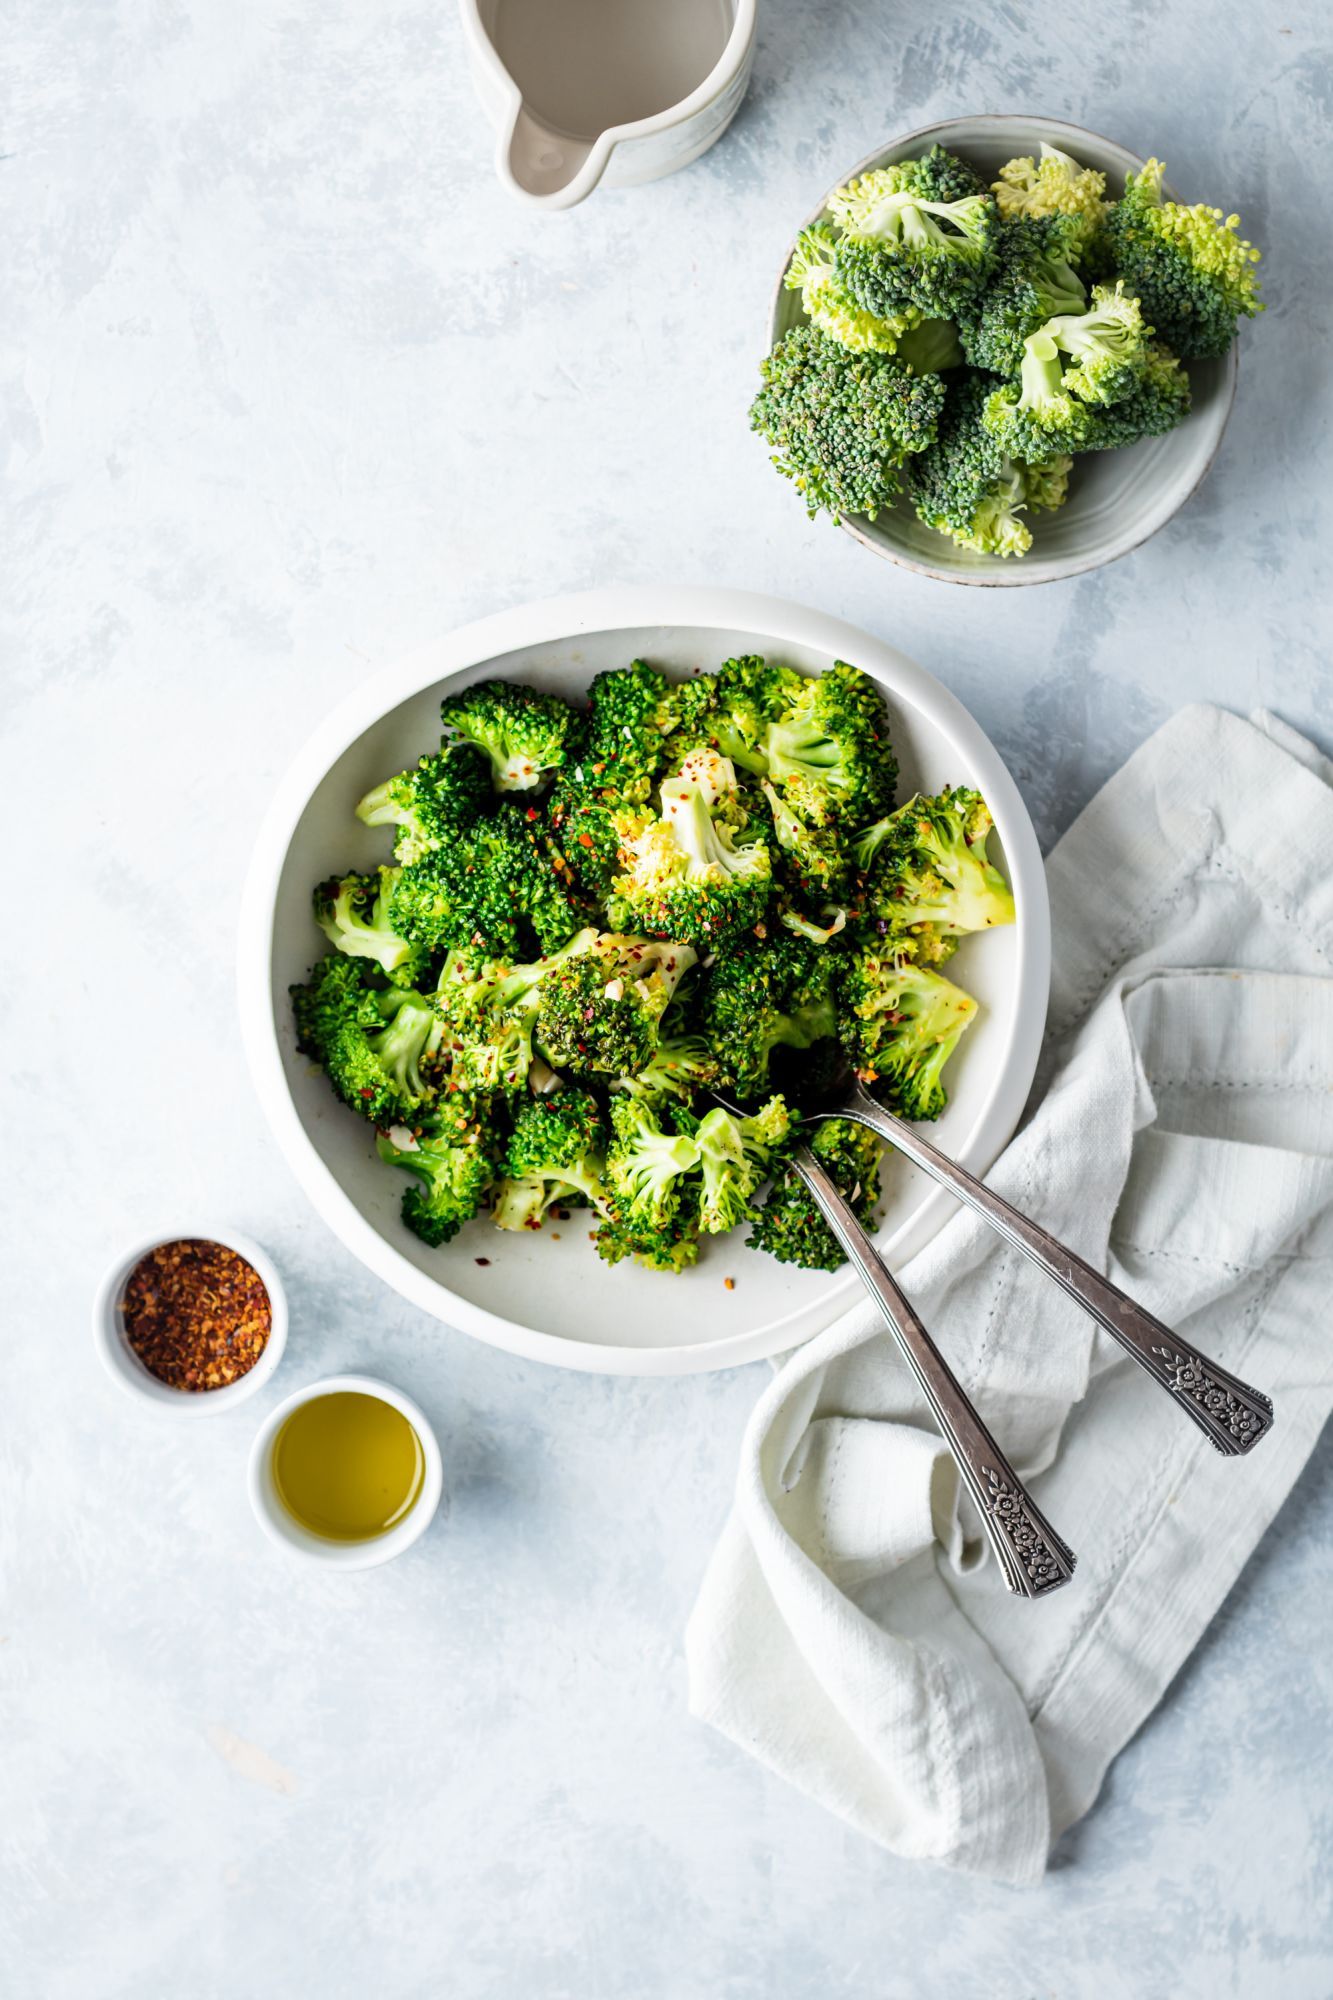 Broccoli that has been pan fried with garlic in a white bowl with olive oil on the side.